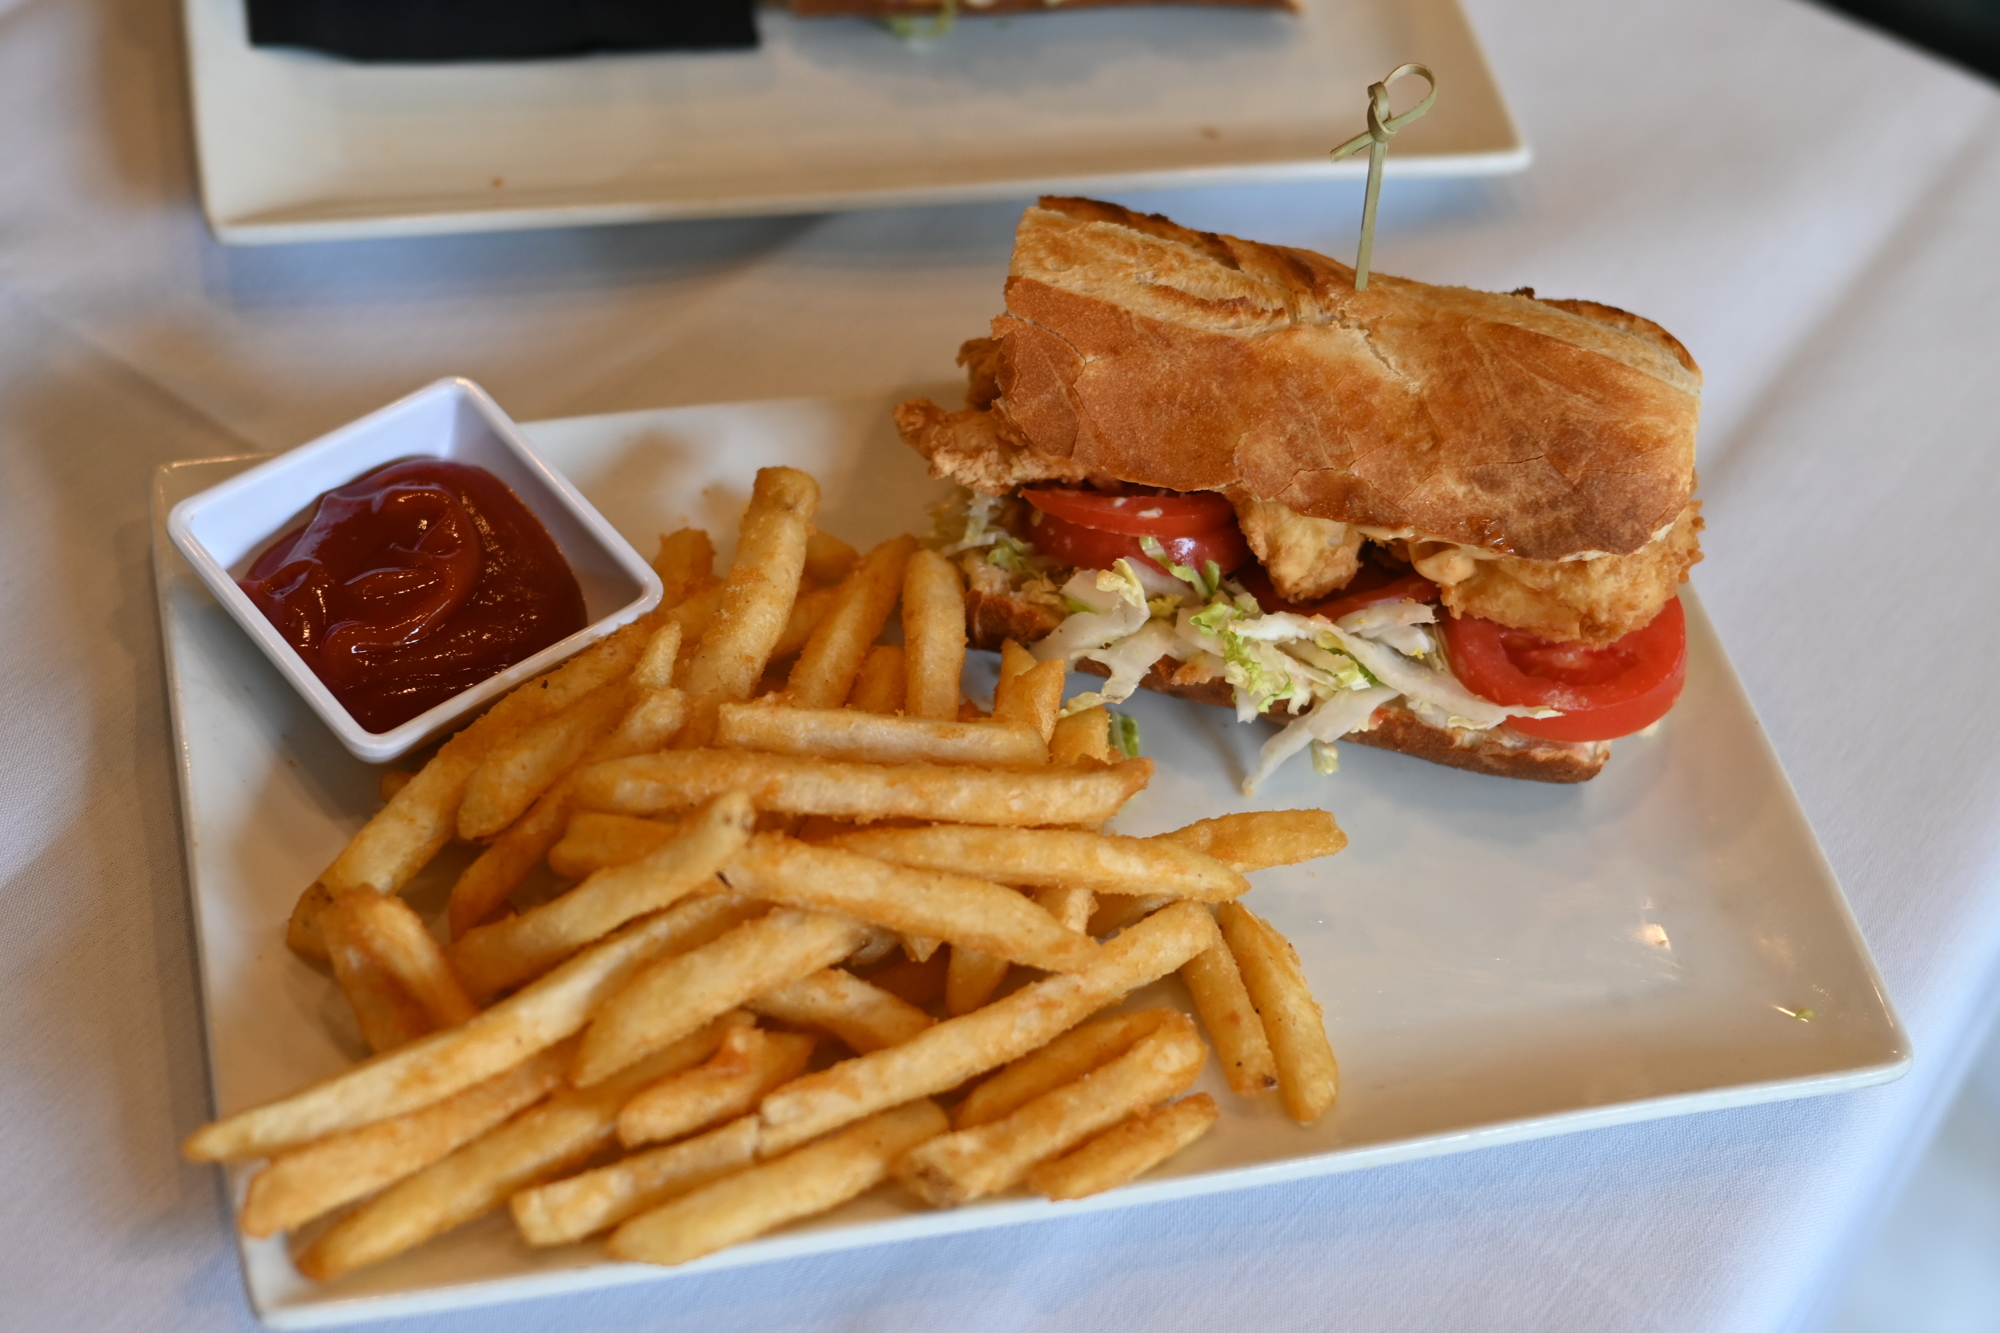 The Duval's po'boy is available with your choice of oysters, shrimp or chicken. (Photo by Spencer Fordin)